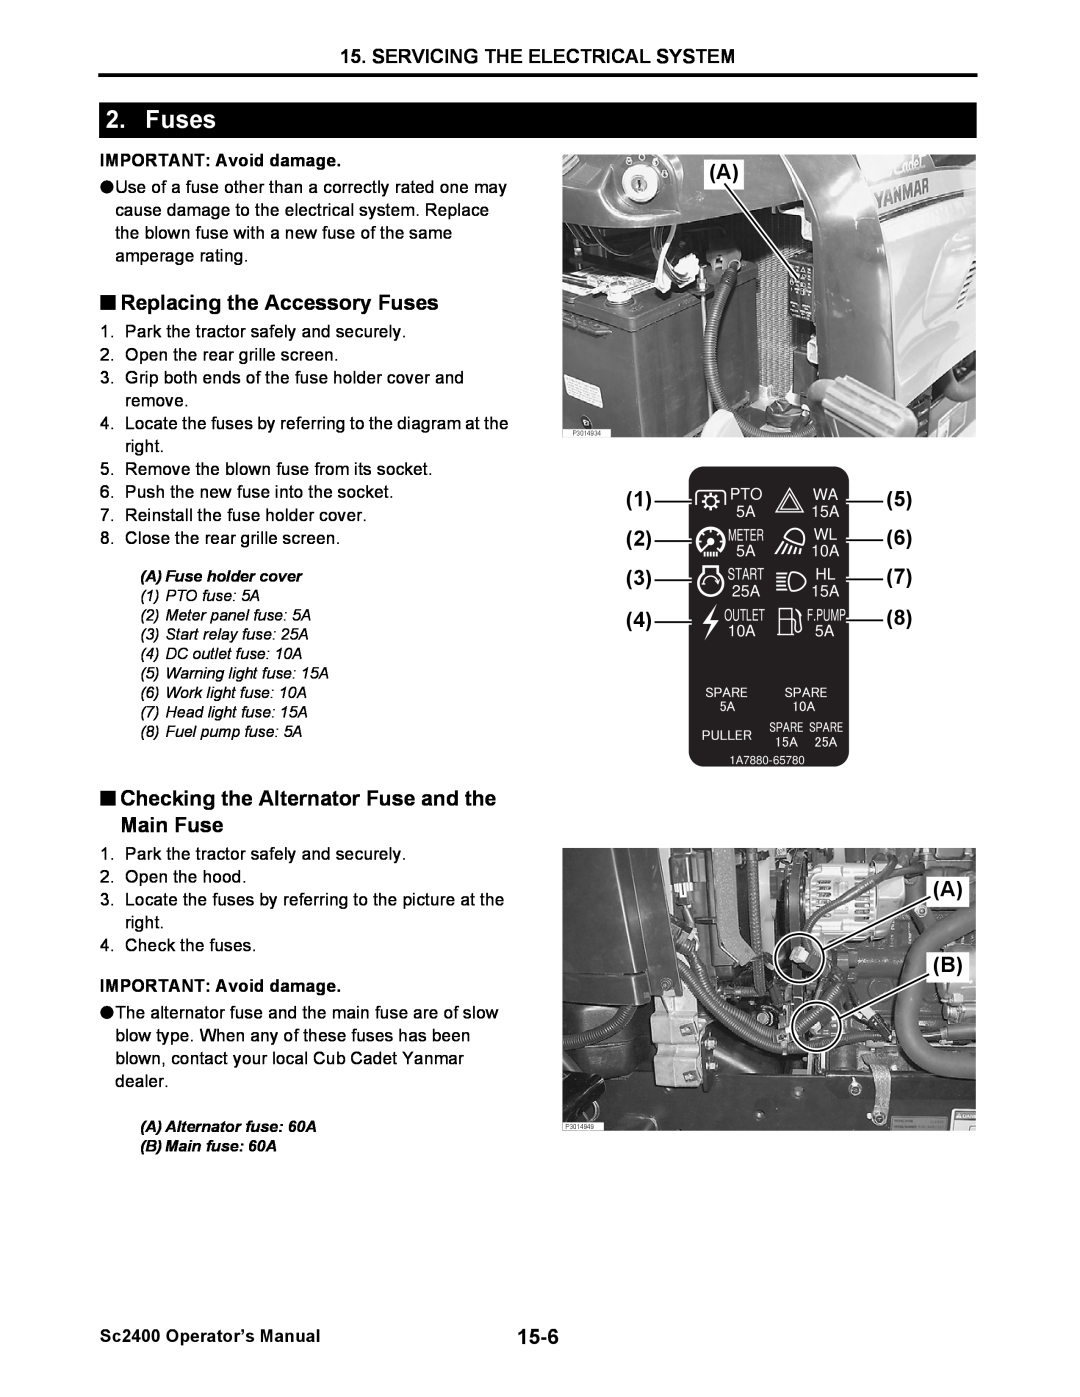 Cub Cadet SC2400 manual Fuses, Servicing The Electrical System, IMPORTANT: Avoid damage, Sc2400 Operator’s Manual 